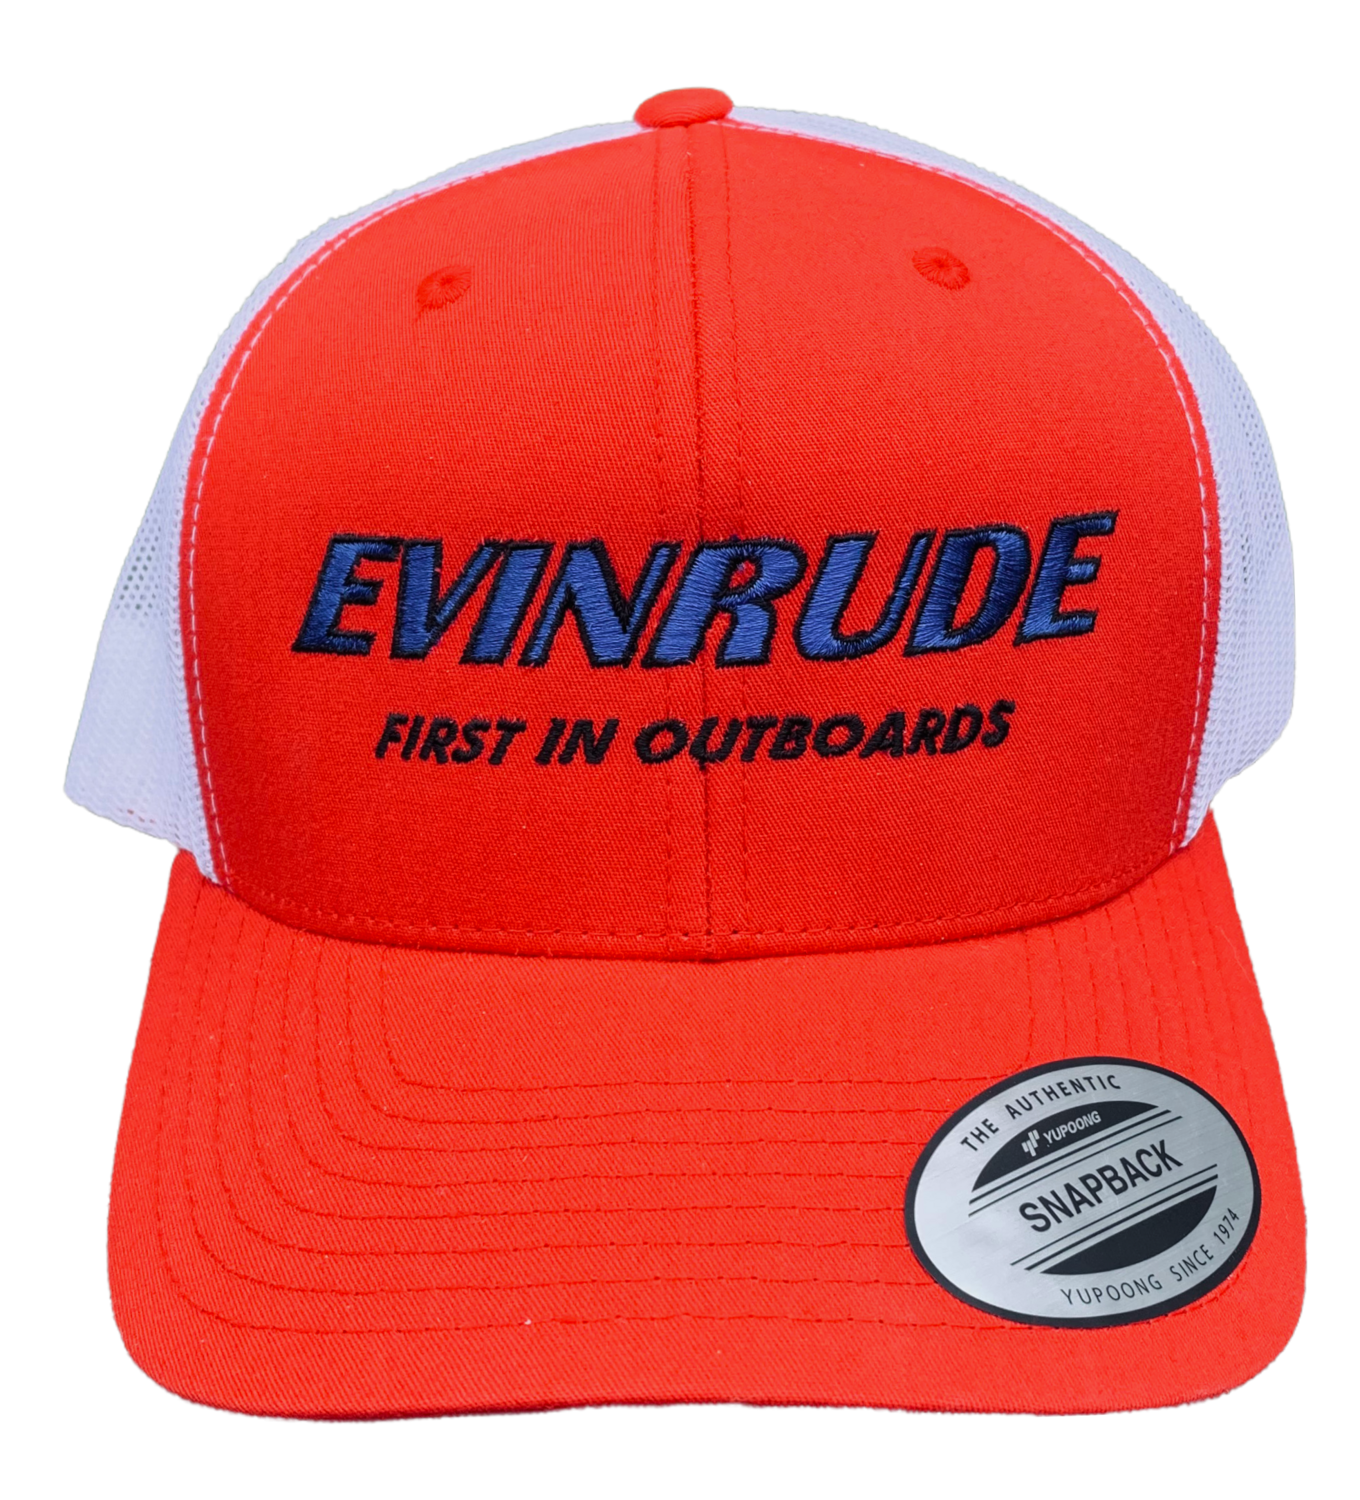 EVINRUDE outboard hat, embroidered